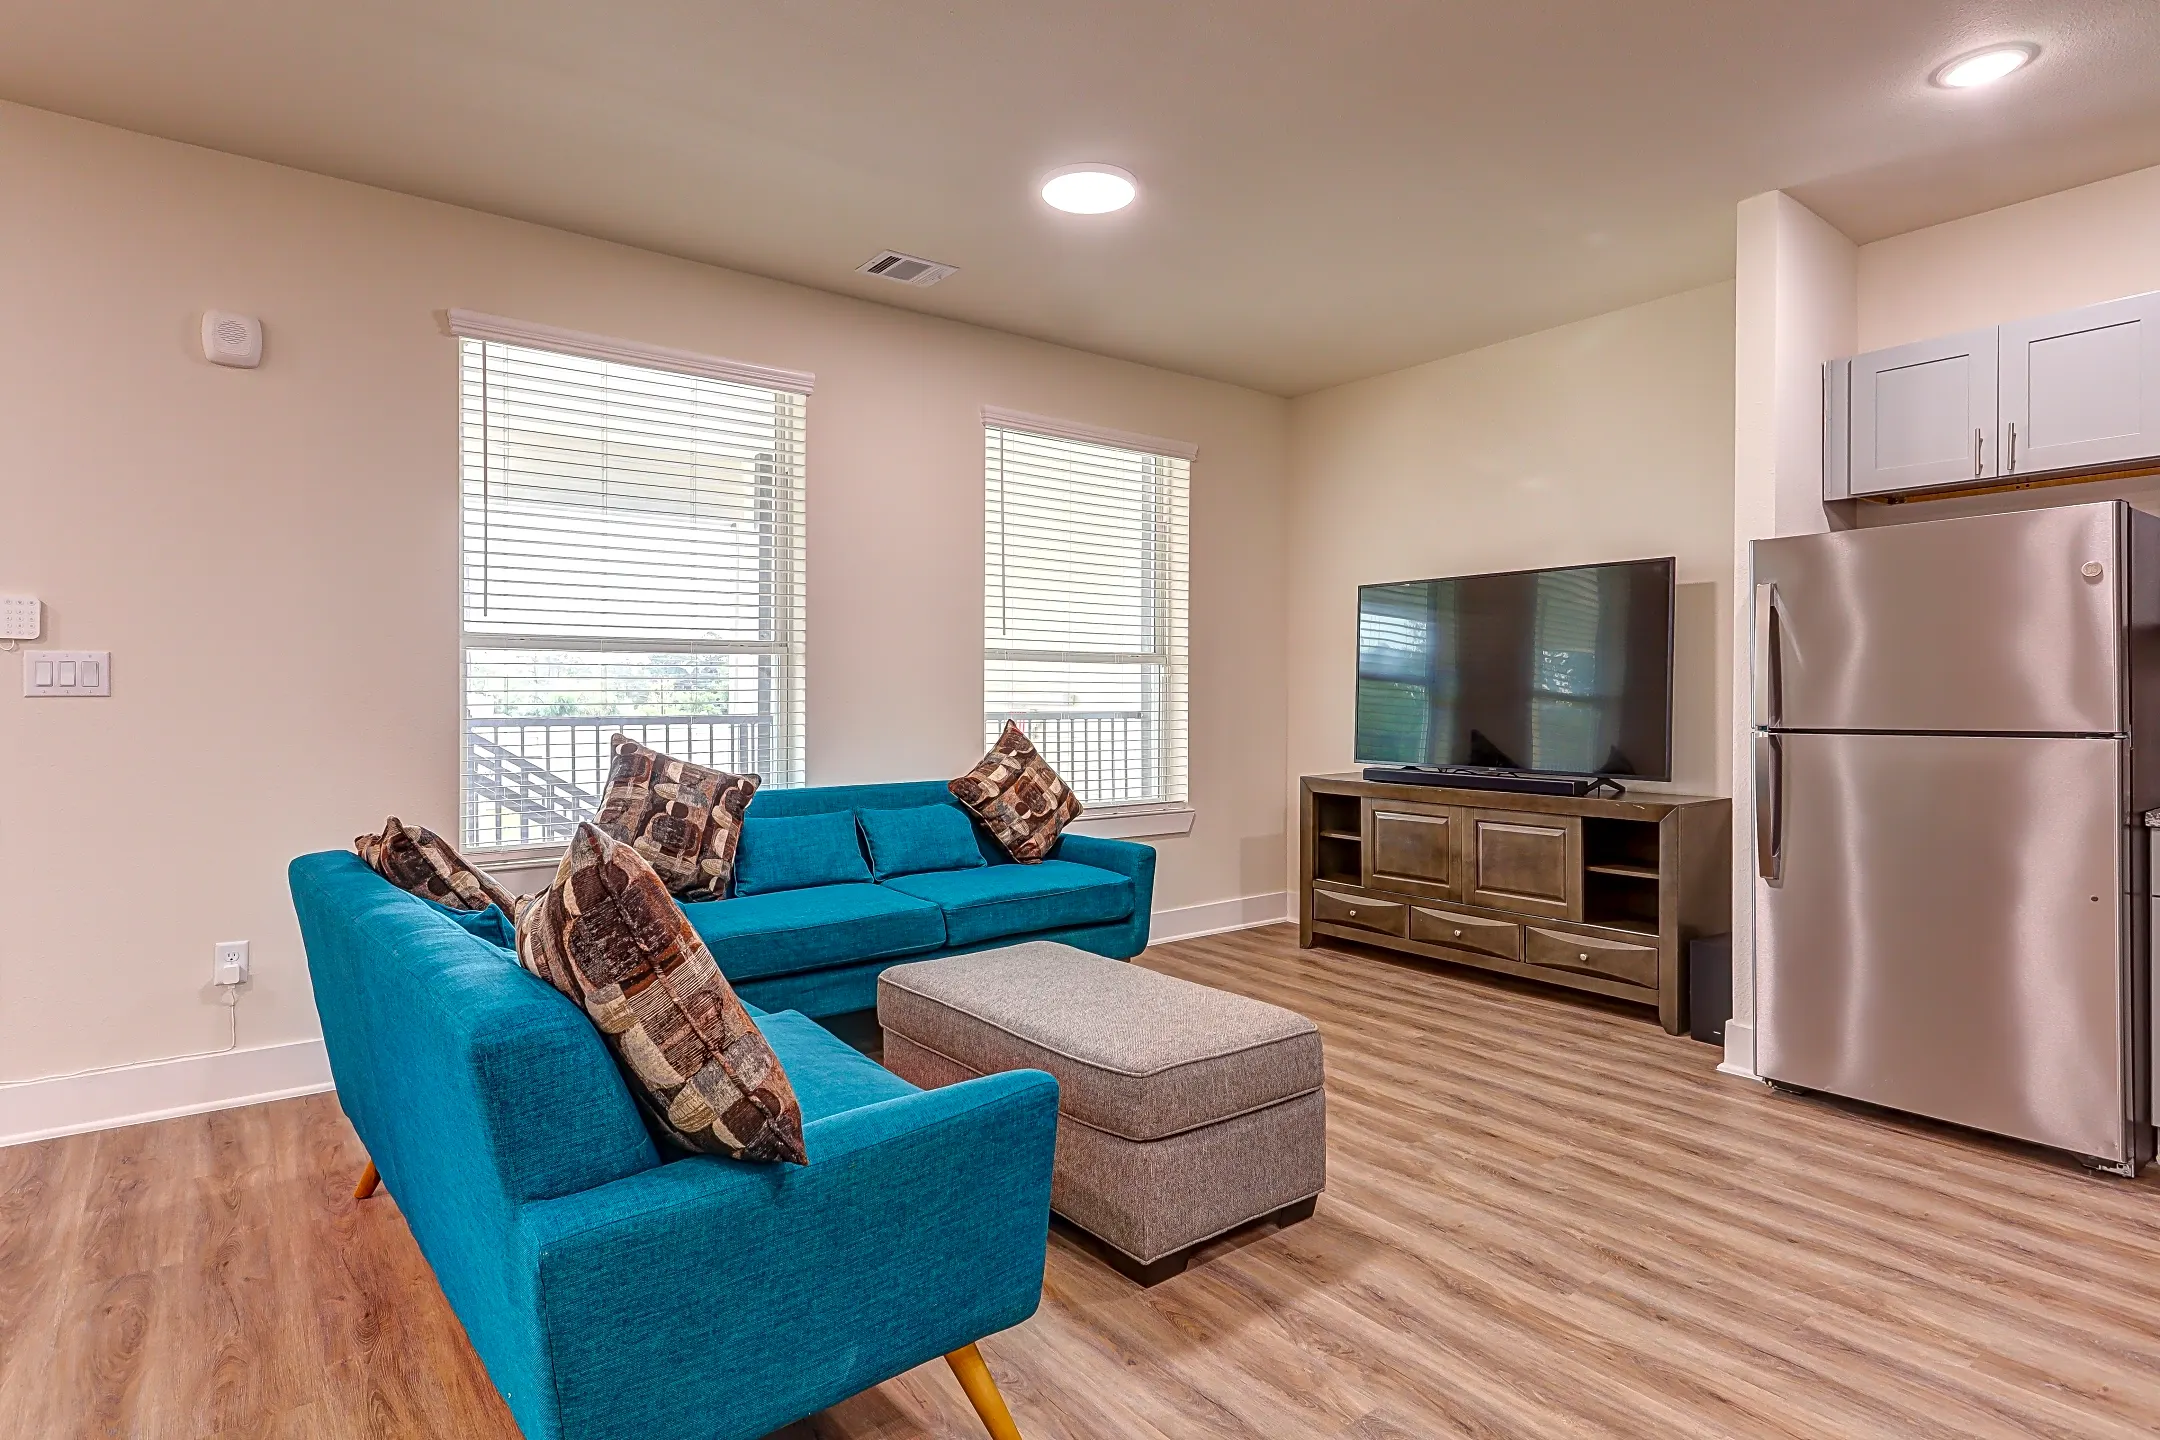 Living Room - Azul Apartments - The Woodlands - Spring, TX